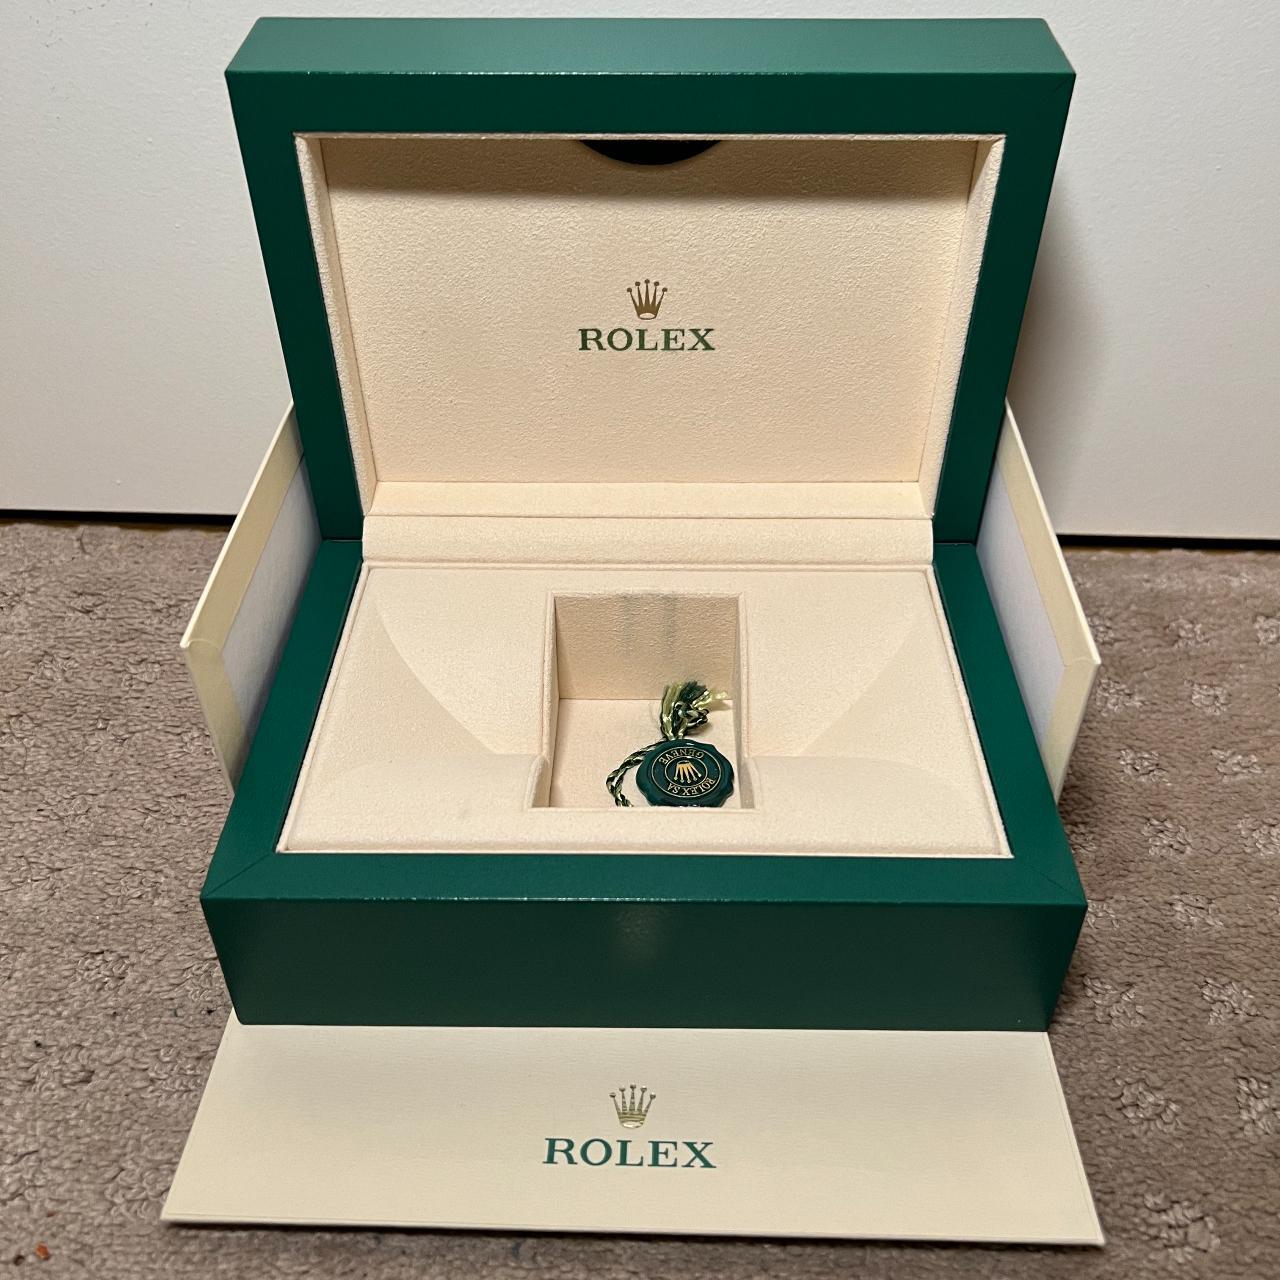 Rolex Men's Green and Gold Watch (2)